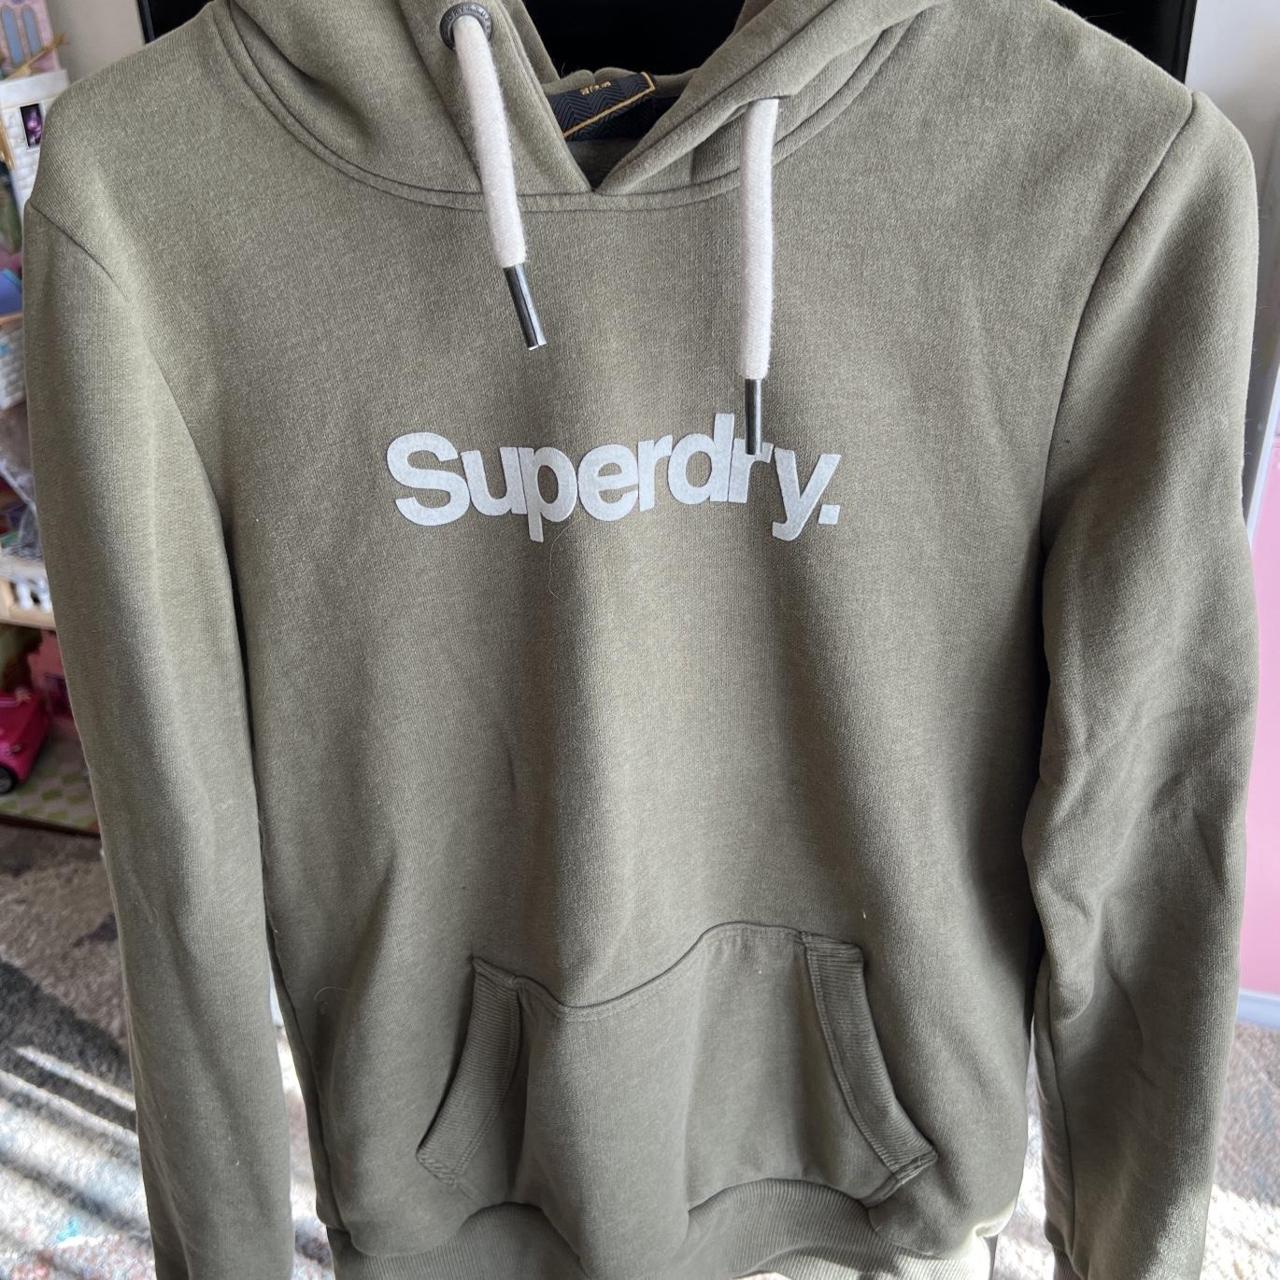 Superdry Women's Green and White Hoodie